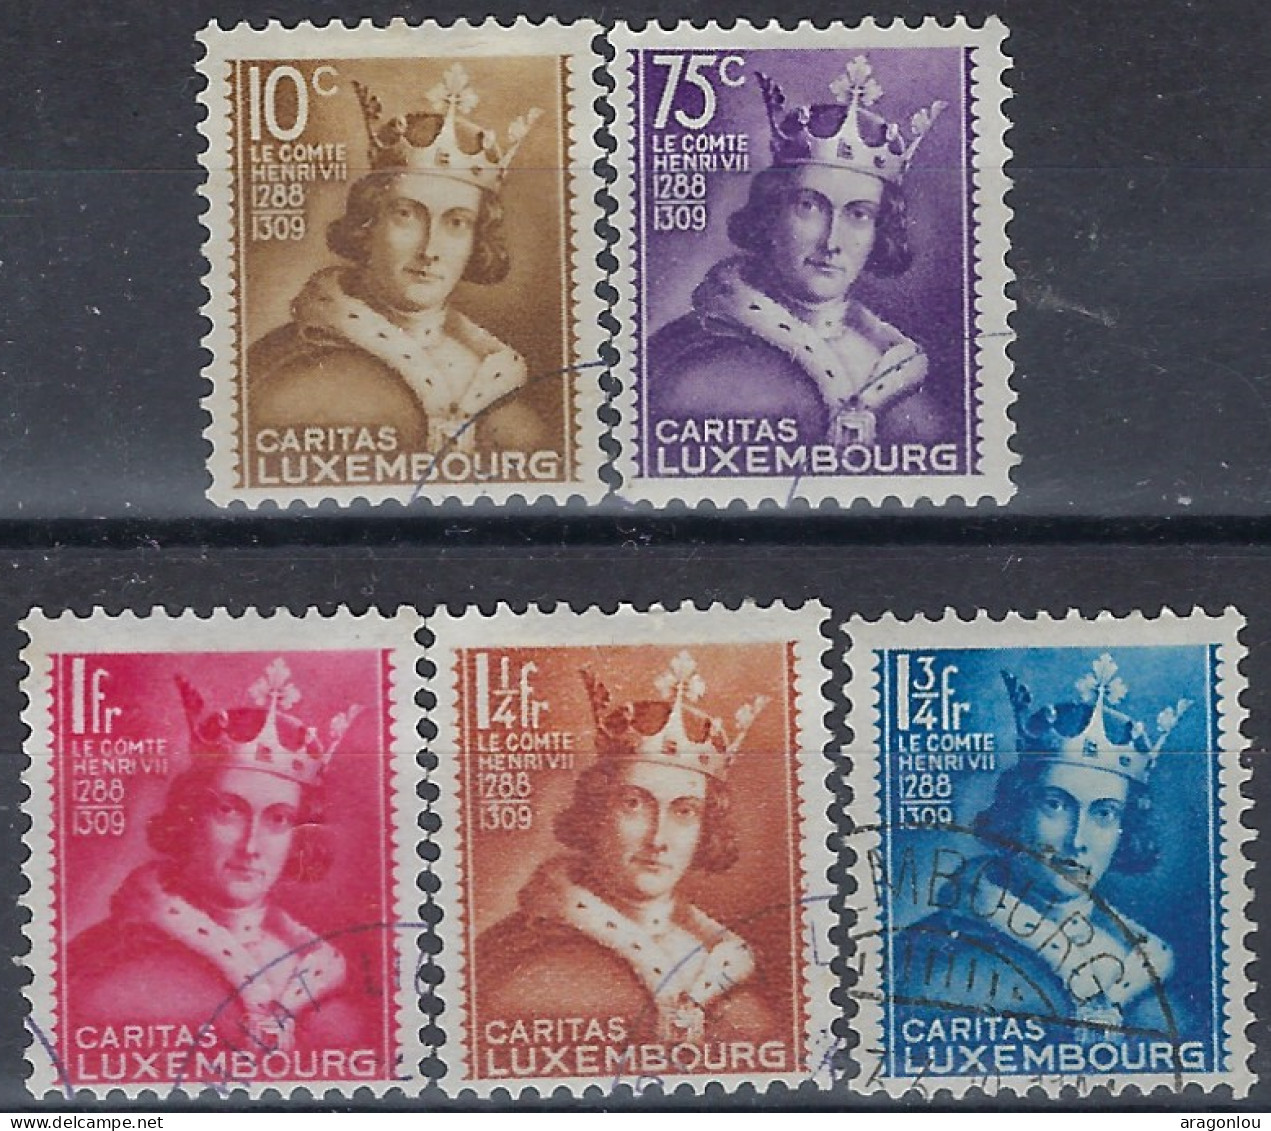 Luxembourg - Luxemburg - Timbres  1933  Série    Henri Le IV    °   VC.180,- - Gebruikt